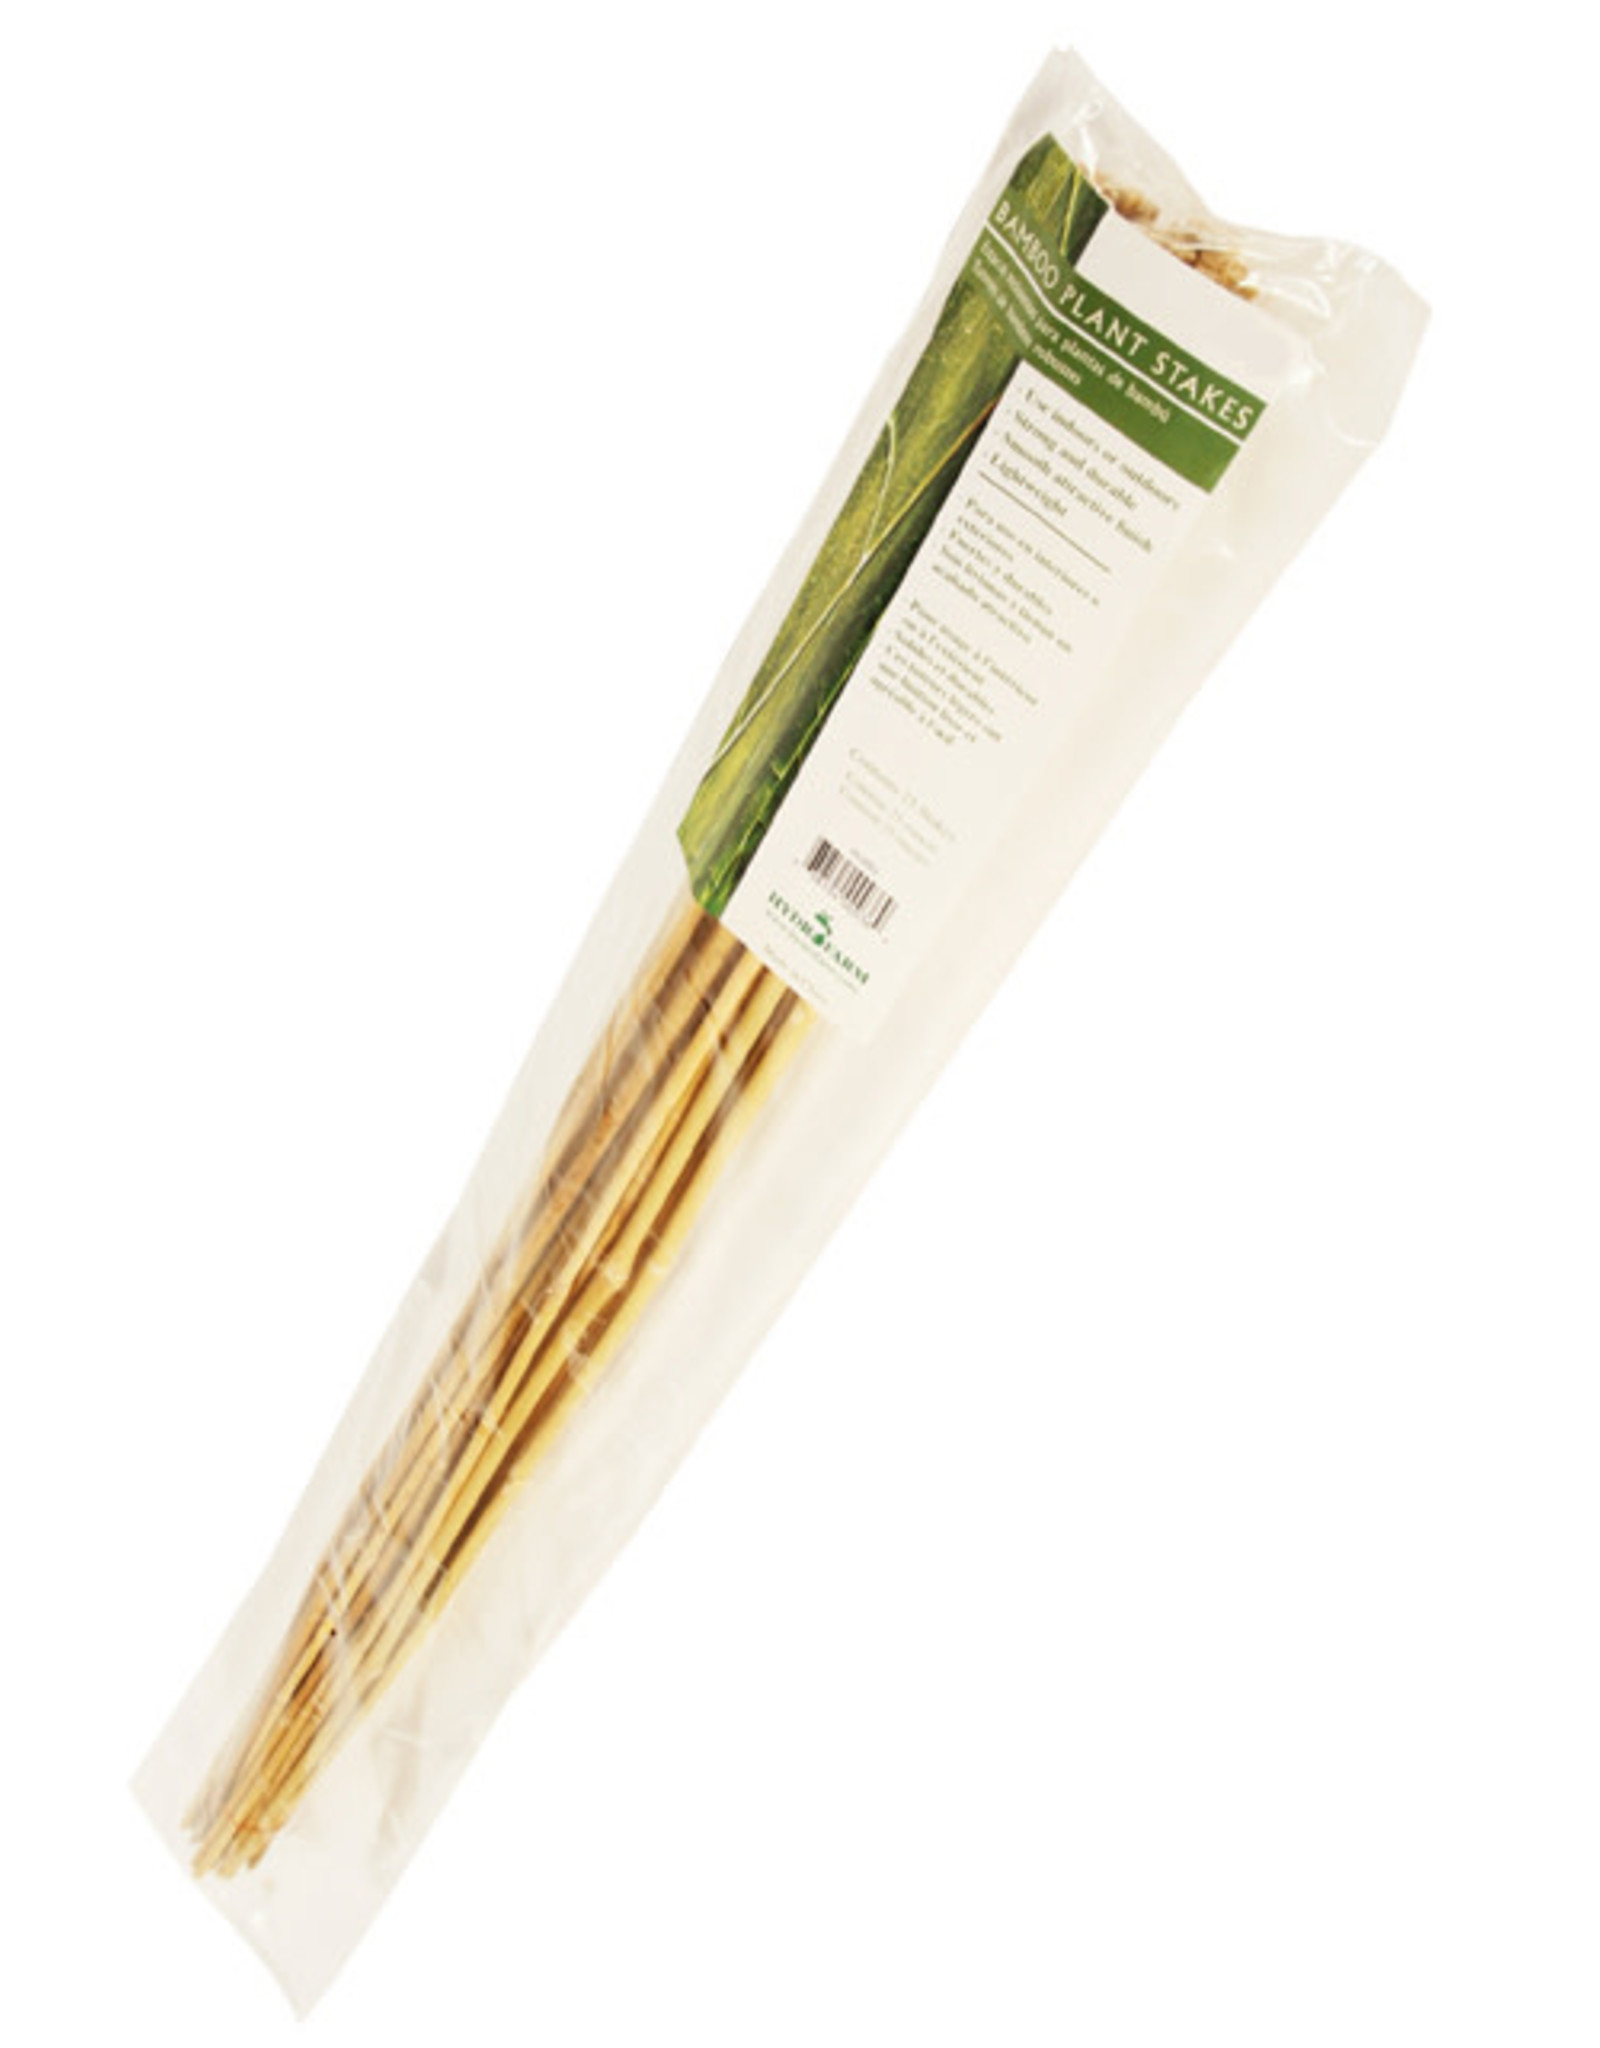 Grow!t GROW!T 6' Bamboo Stakes, Natural, pack of 25